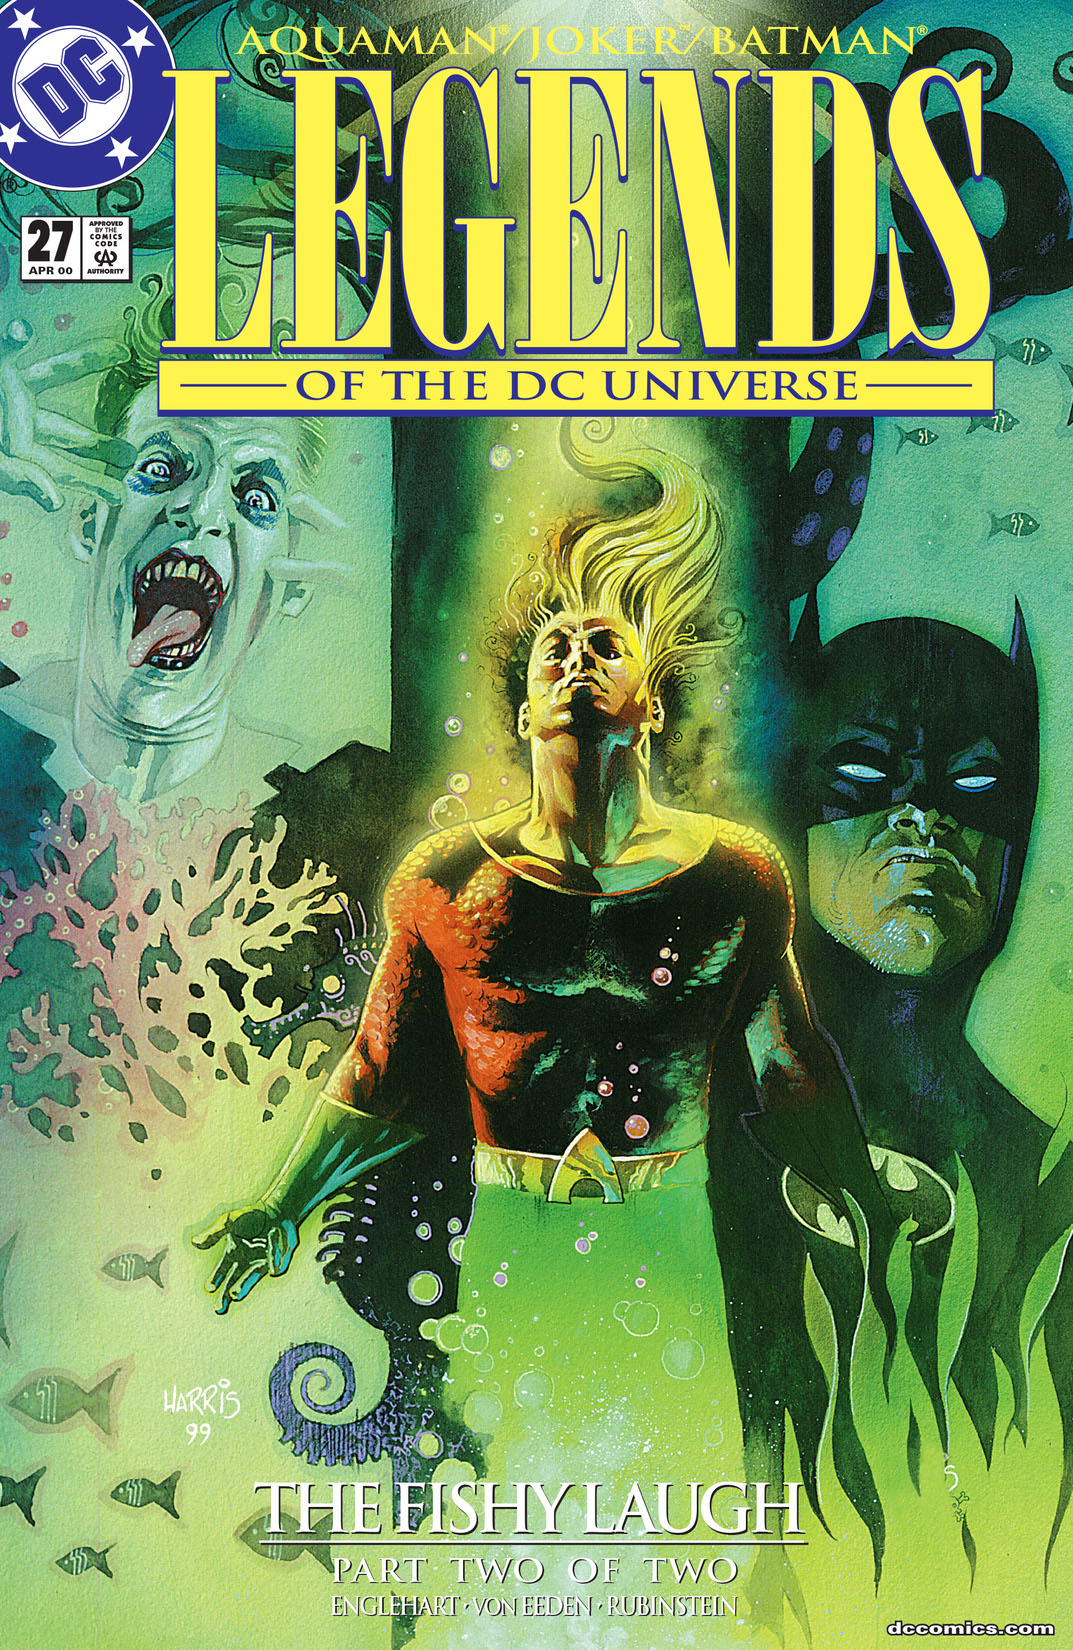 Legends of the DC Universe #27 preview images